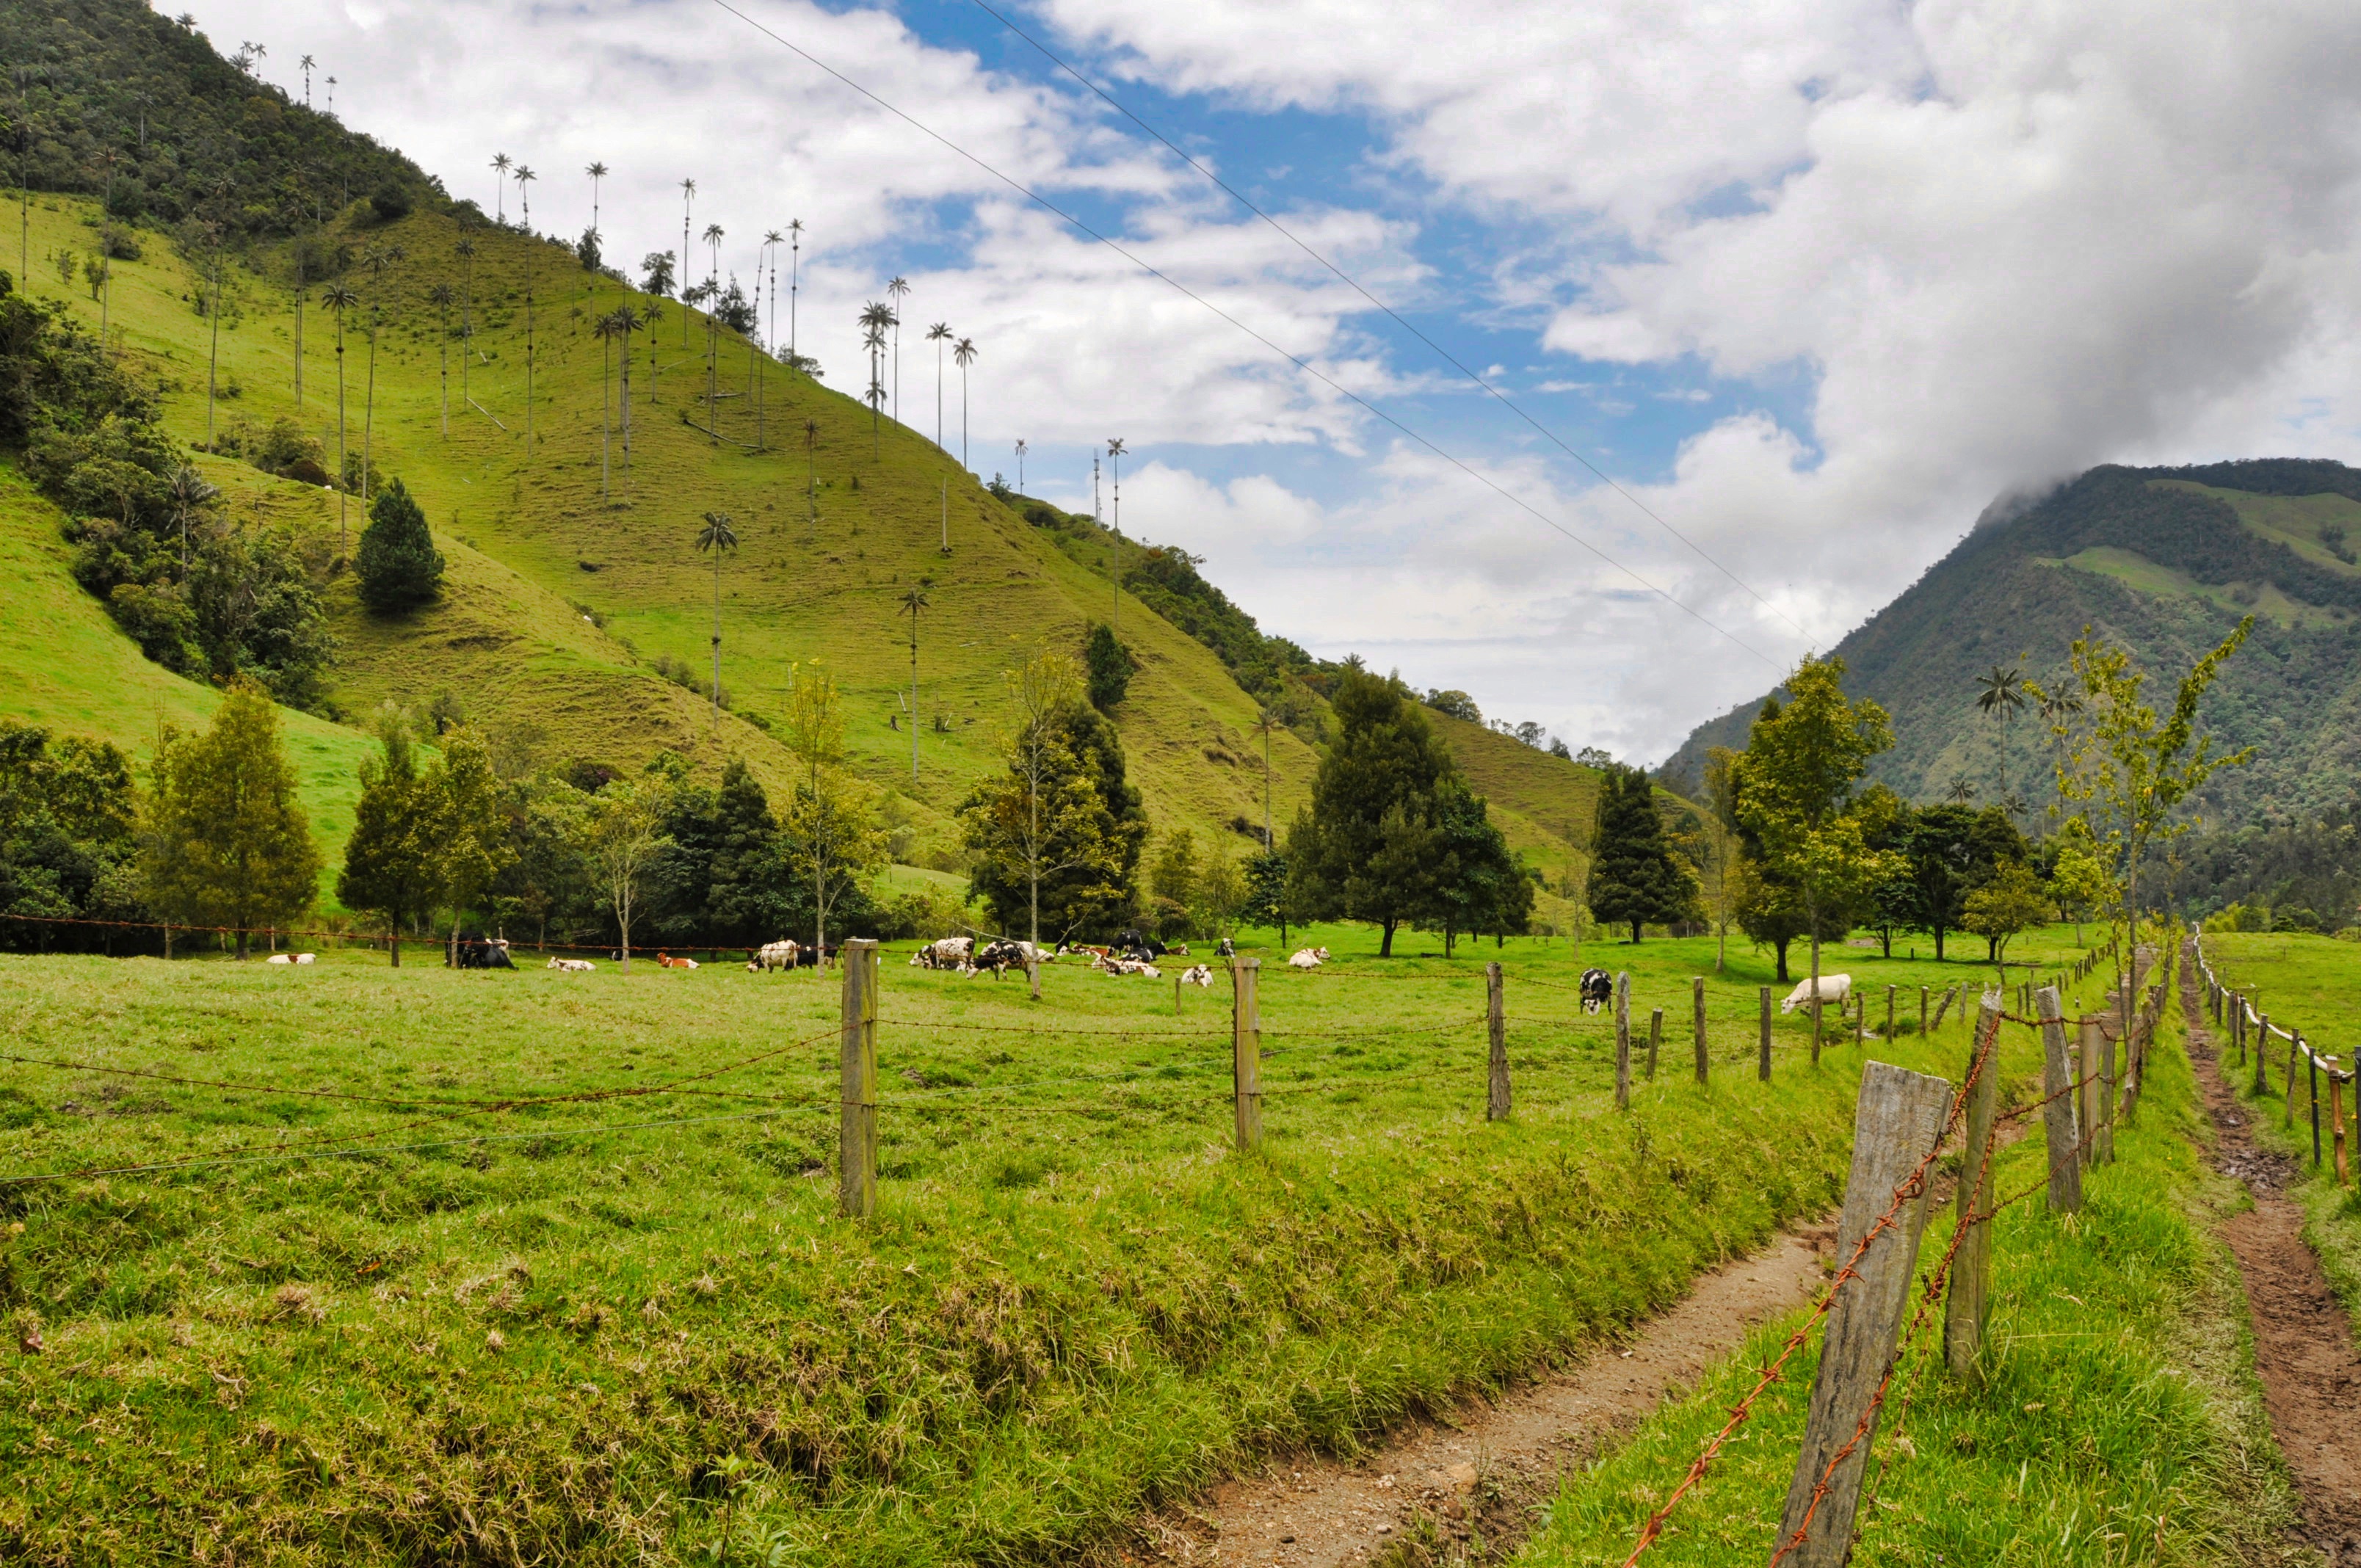 Two Travel The World - Valle de Cocora (Cocora Valley)